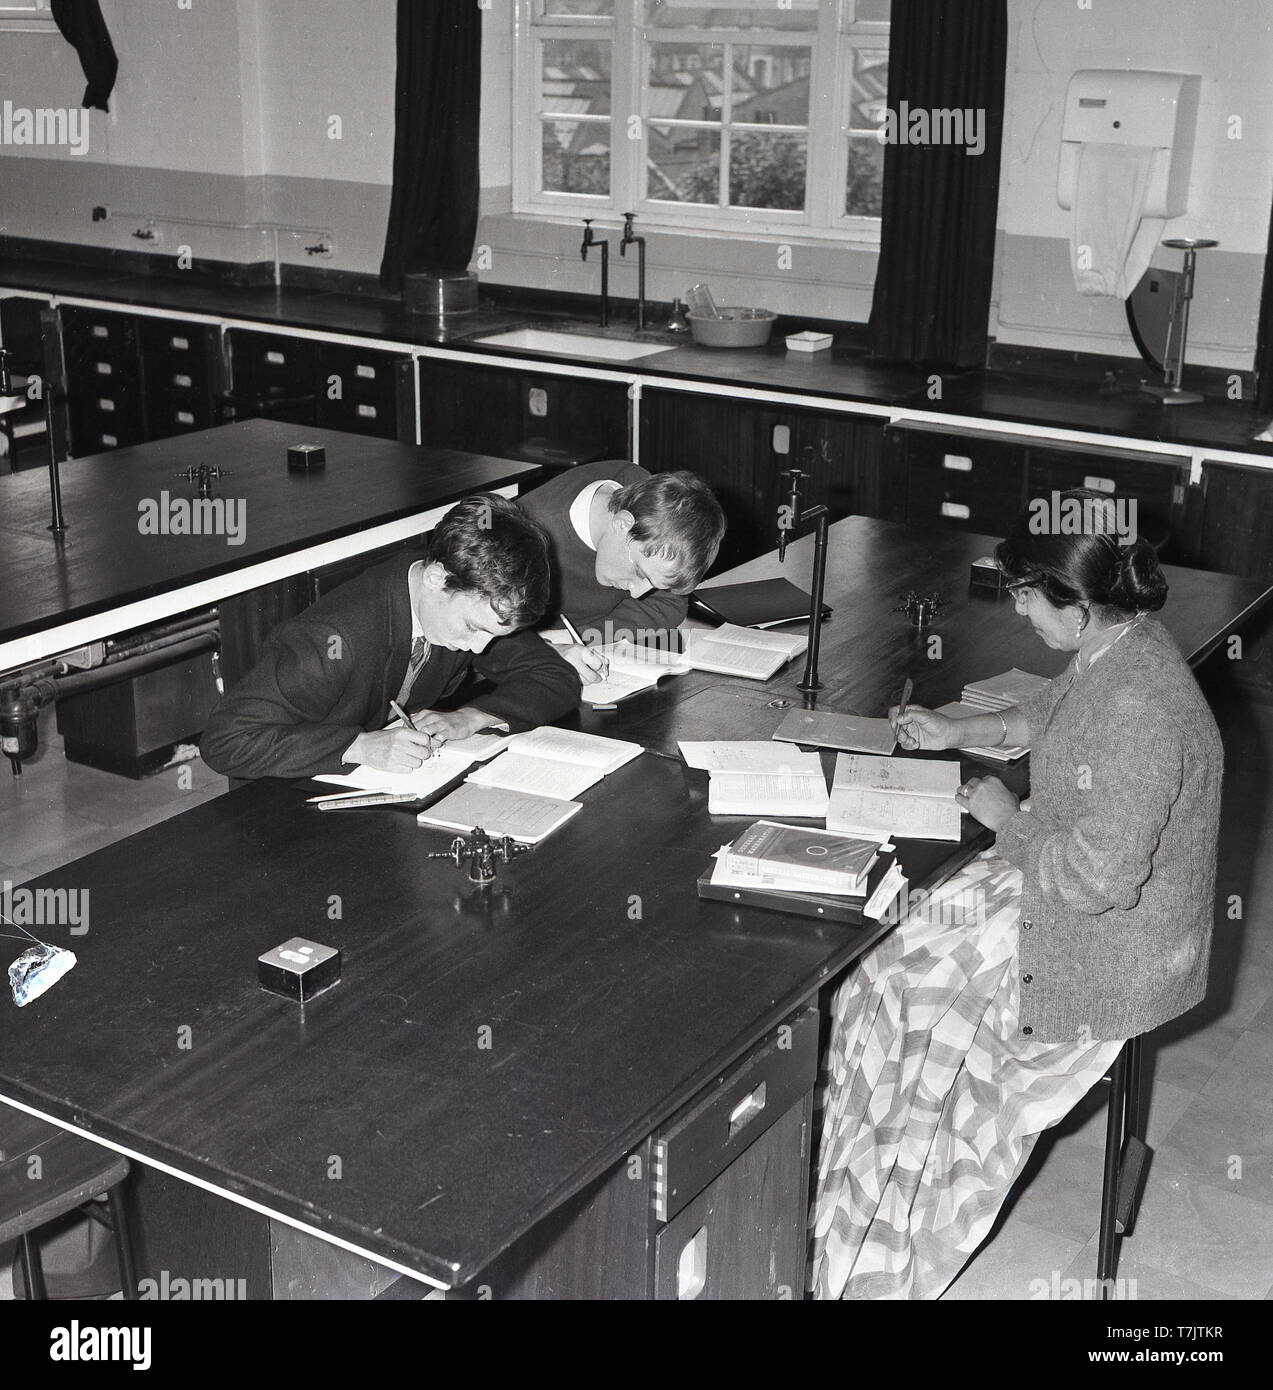 1960s, historical, in an empty secondary school classroom, a female mathematics teacher sitting at a desk overseeing two male pupils at the same desk doing additional study work after class, South London, England, UK. Stock Photo